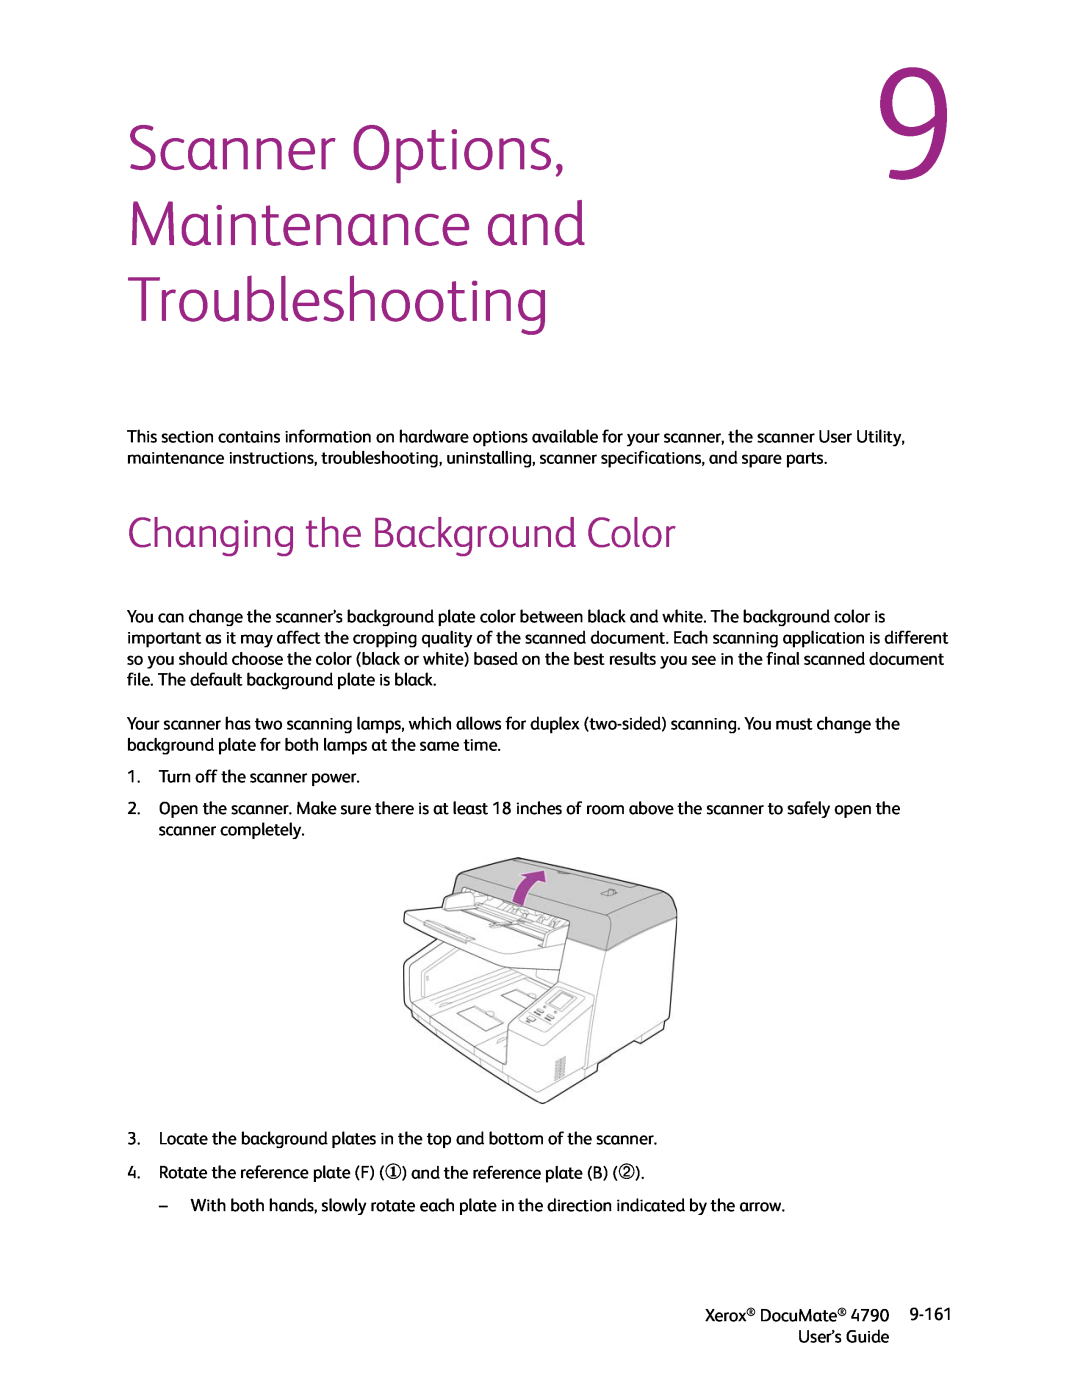 Xerox xerox documate manual Scanner Options, Maintenance and Troubleshooting, Changing the Background Color 